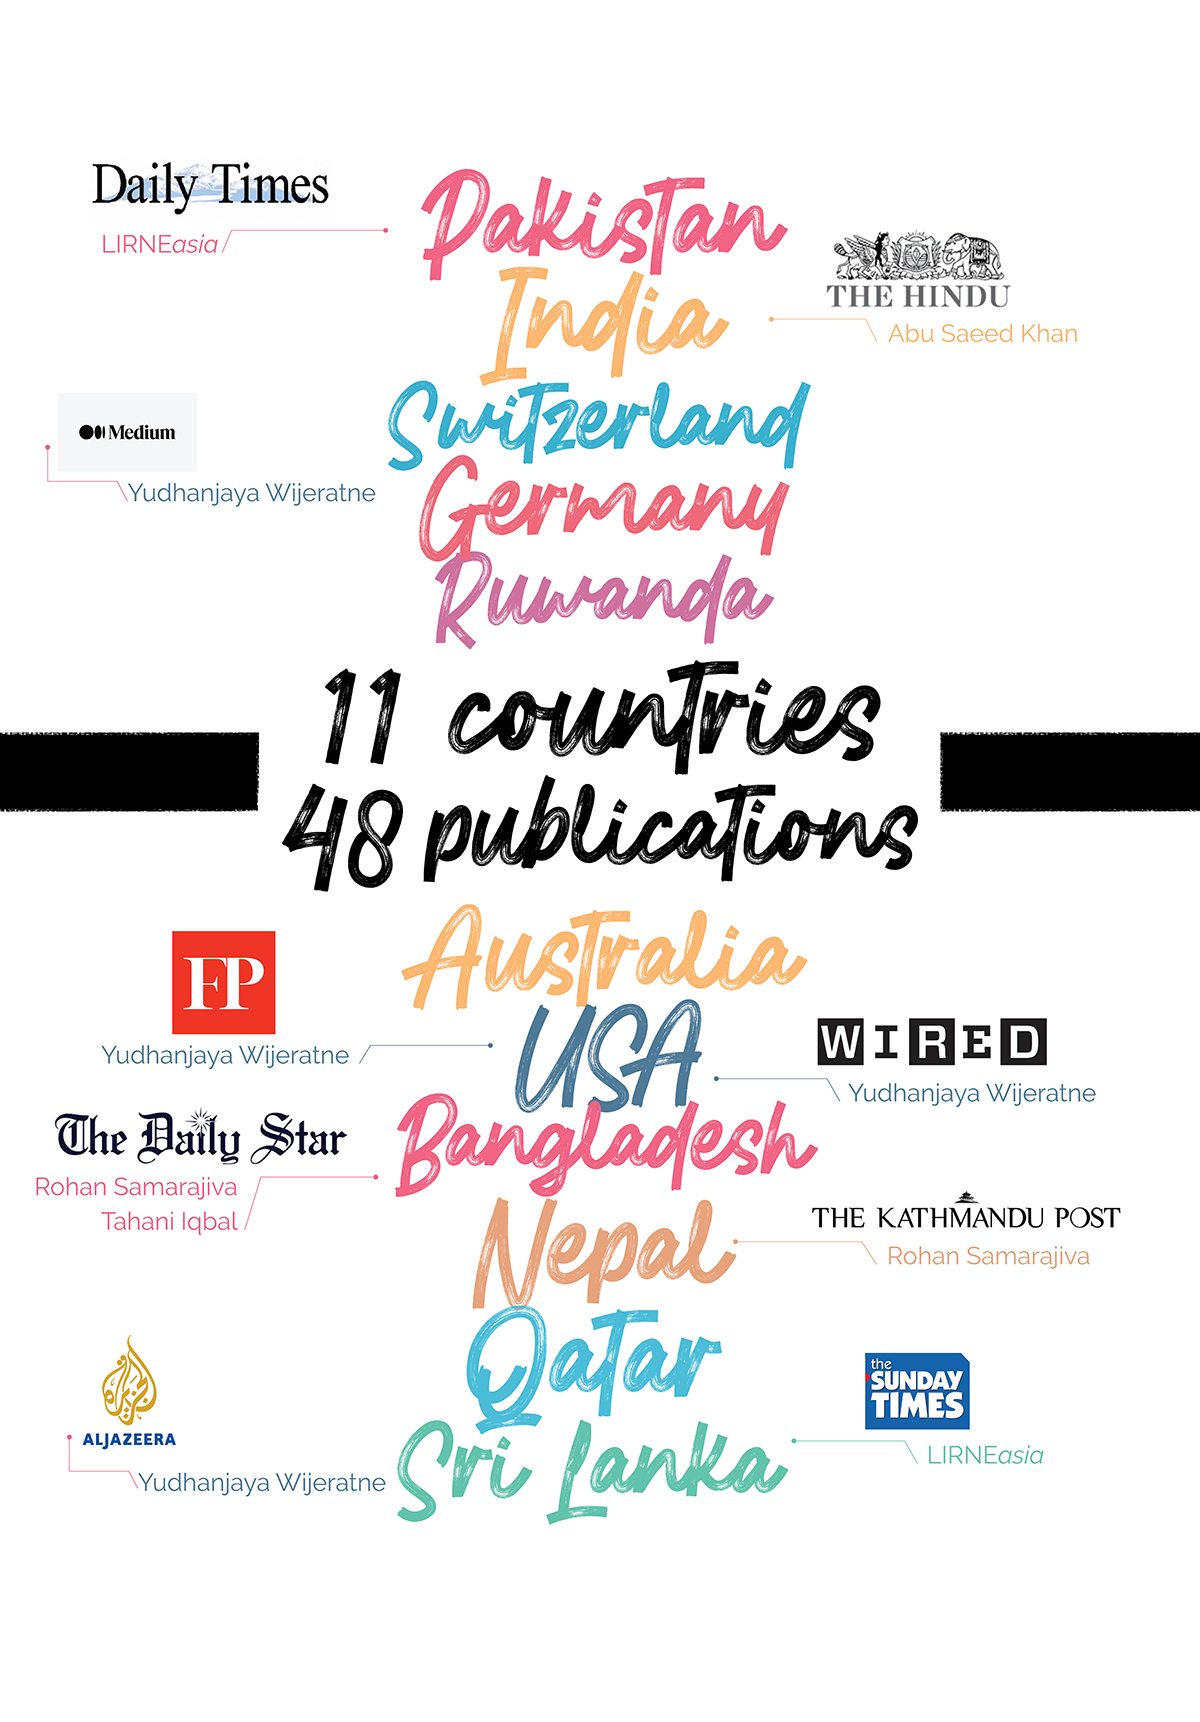 Our research and/or researchers were featured in 48 publications in 11 countries